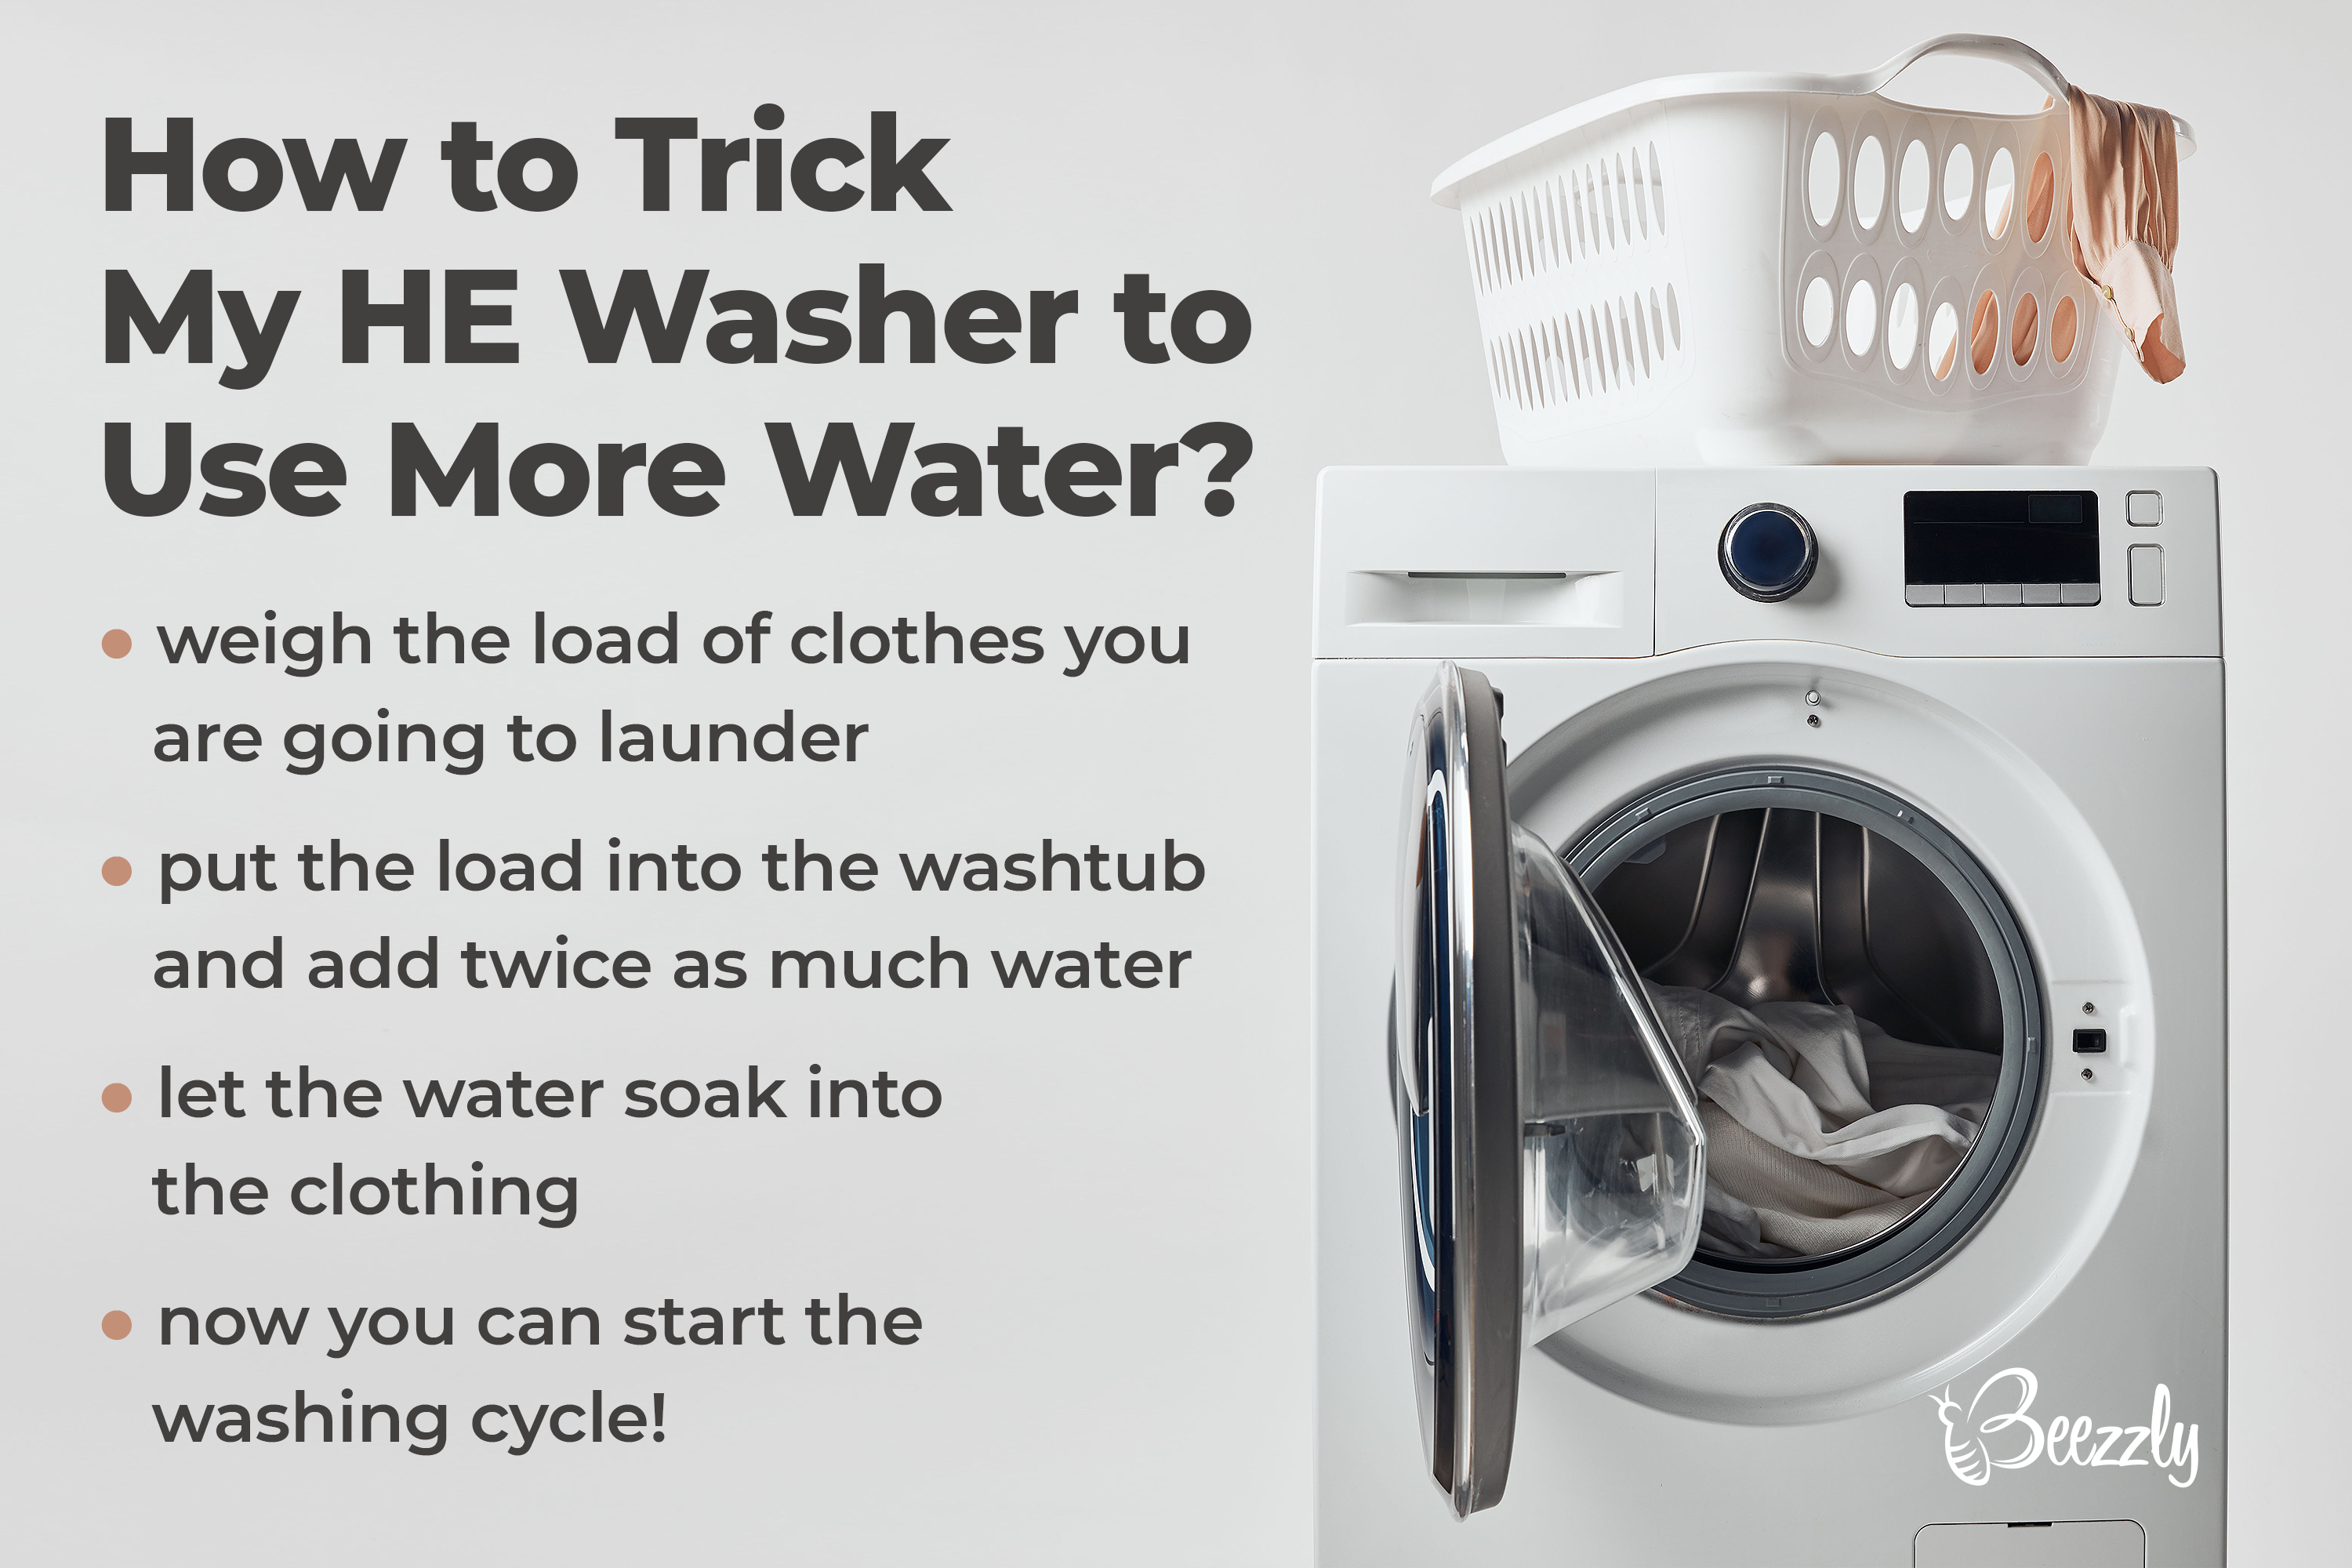 How to Trick My HE Washer to Use More Water